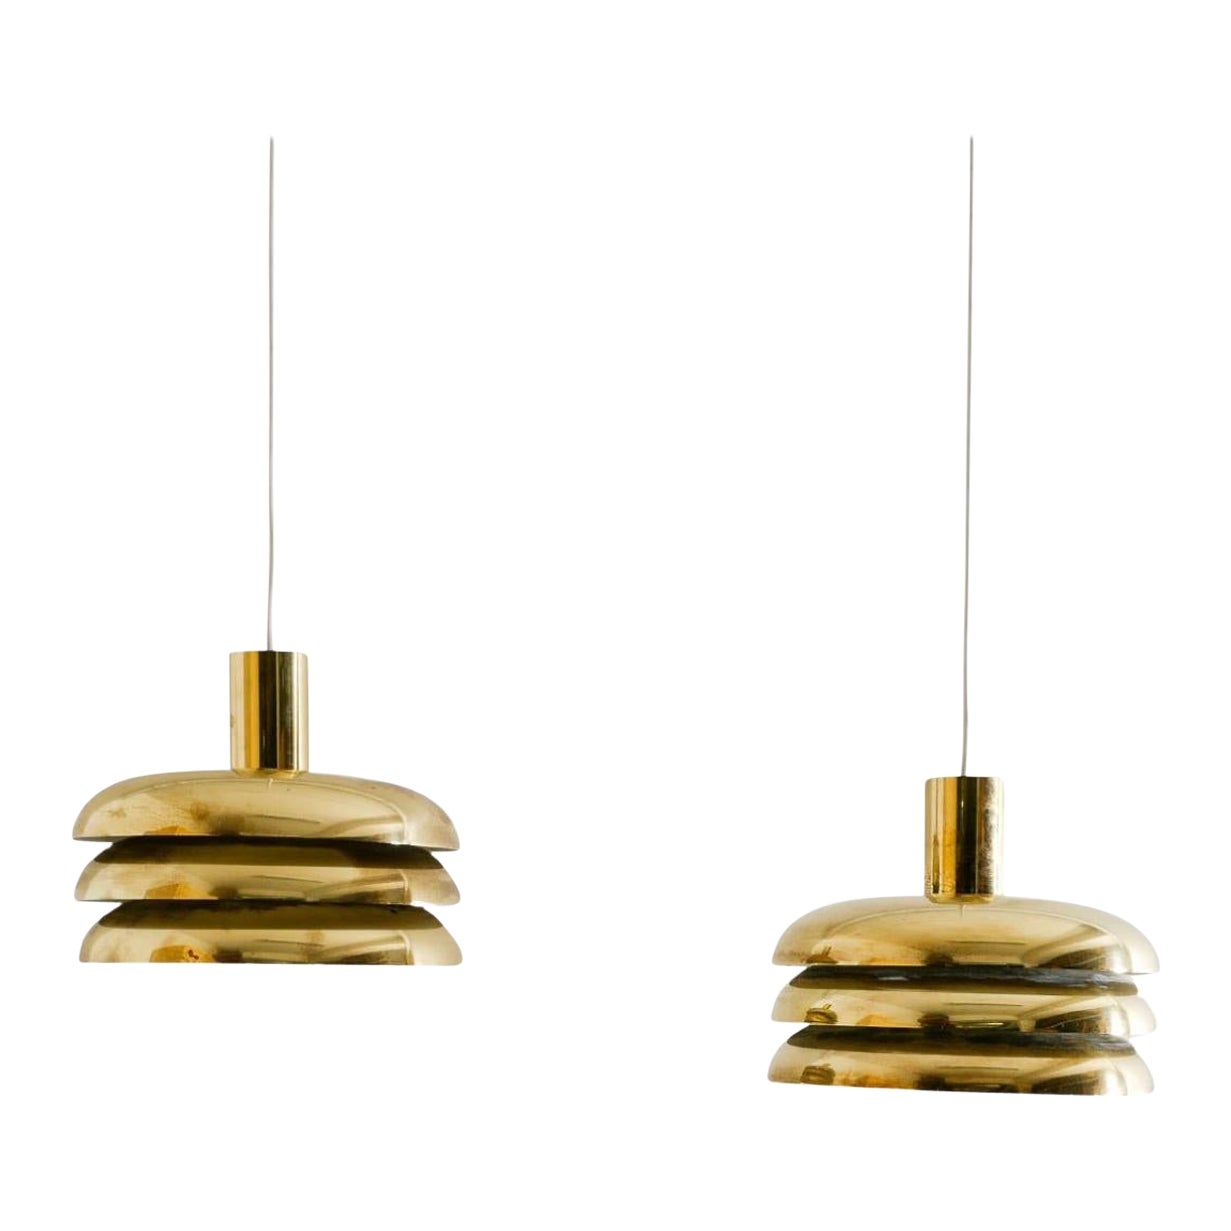 Pair of Midcentury Brass Pendants by Hans-Agne Jakobsson Produced in Sweden